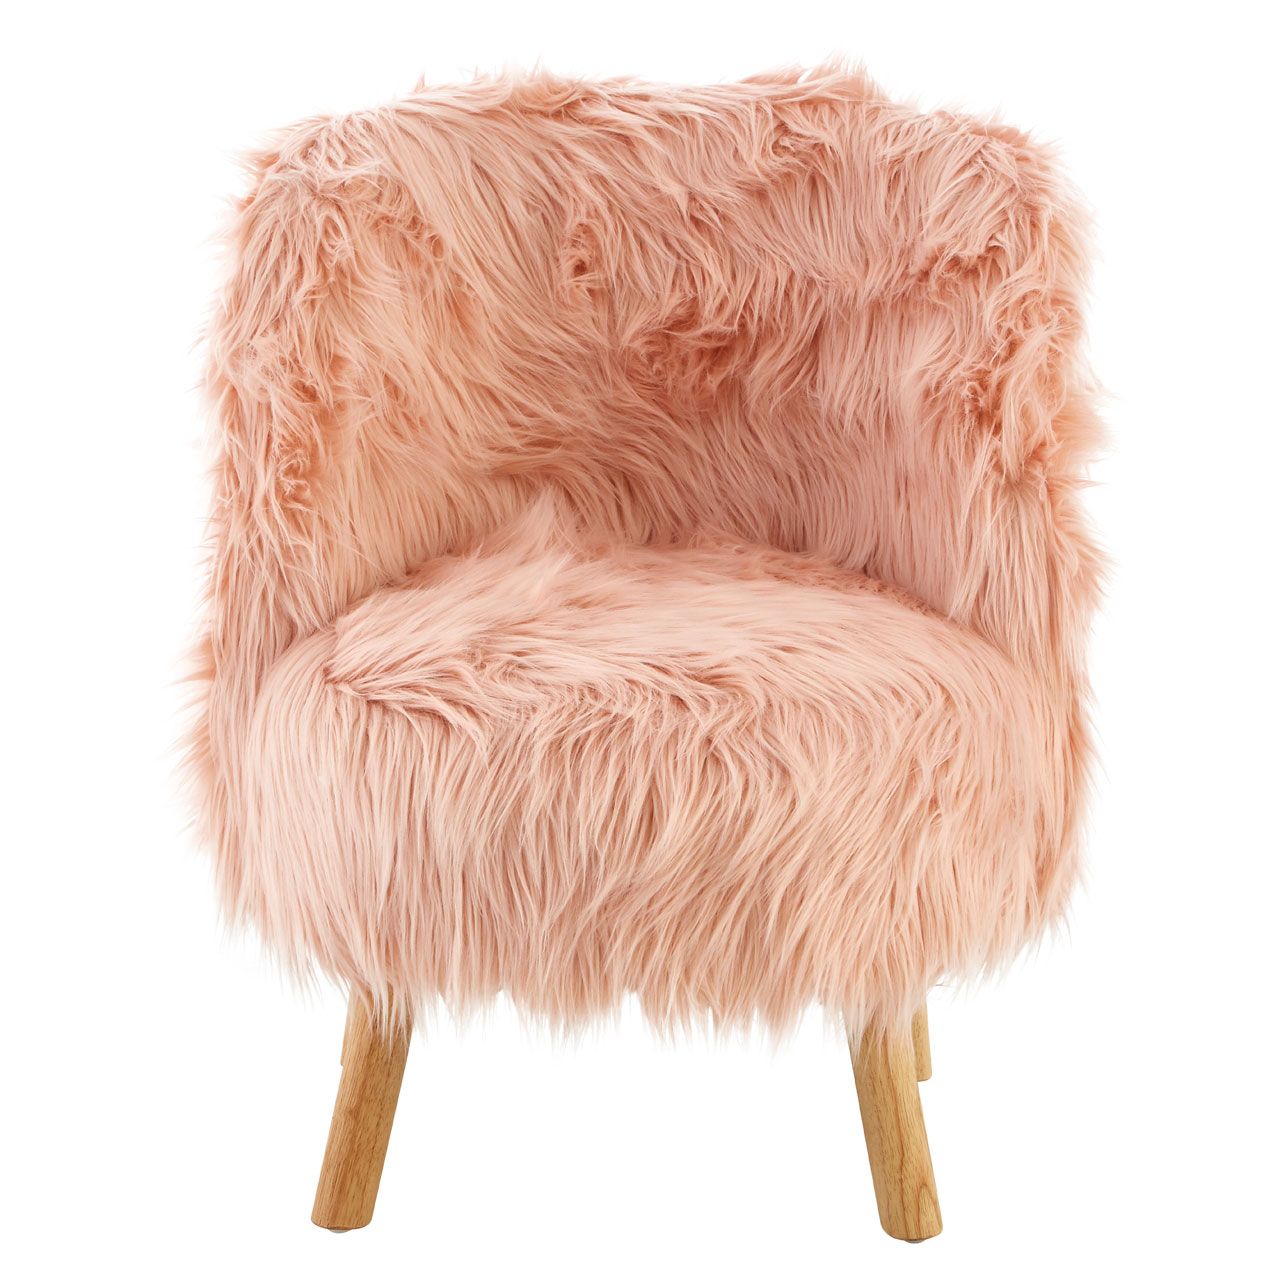 Kids Pink Chair Faux Fur Living Room Home Furniture Fluffy Accent | Ebay Inside White Faux Fur Round Accent Stools With Storage (View 7 of 20)